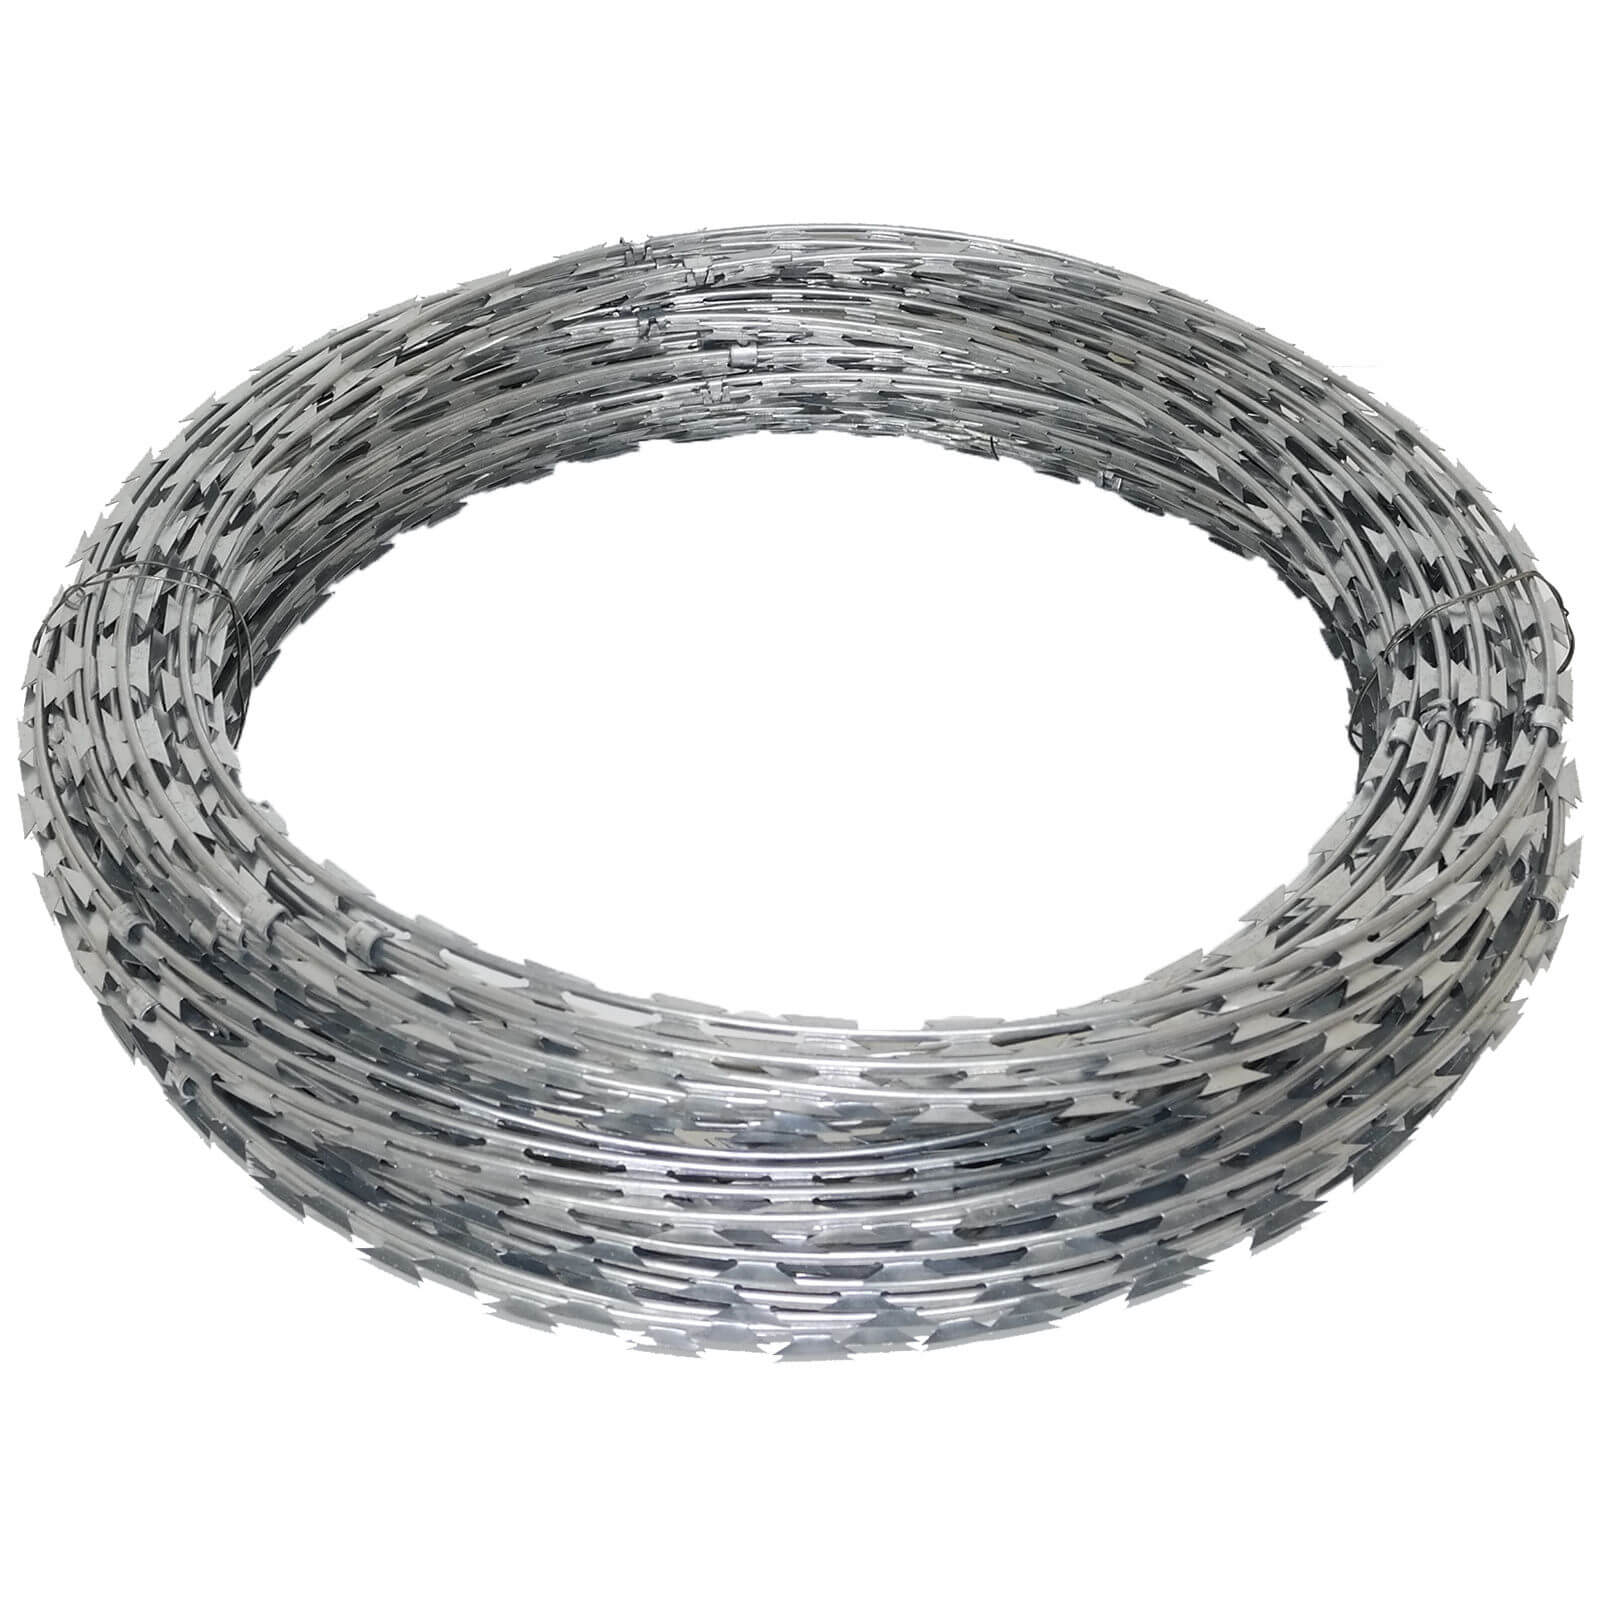 Razor wire fencing: the ideal solution for safeguarding your premises